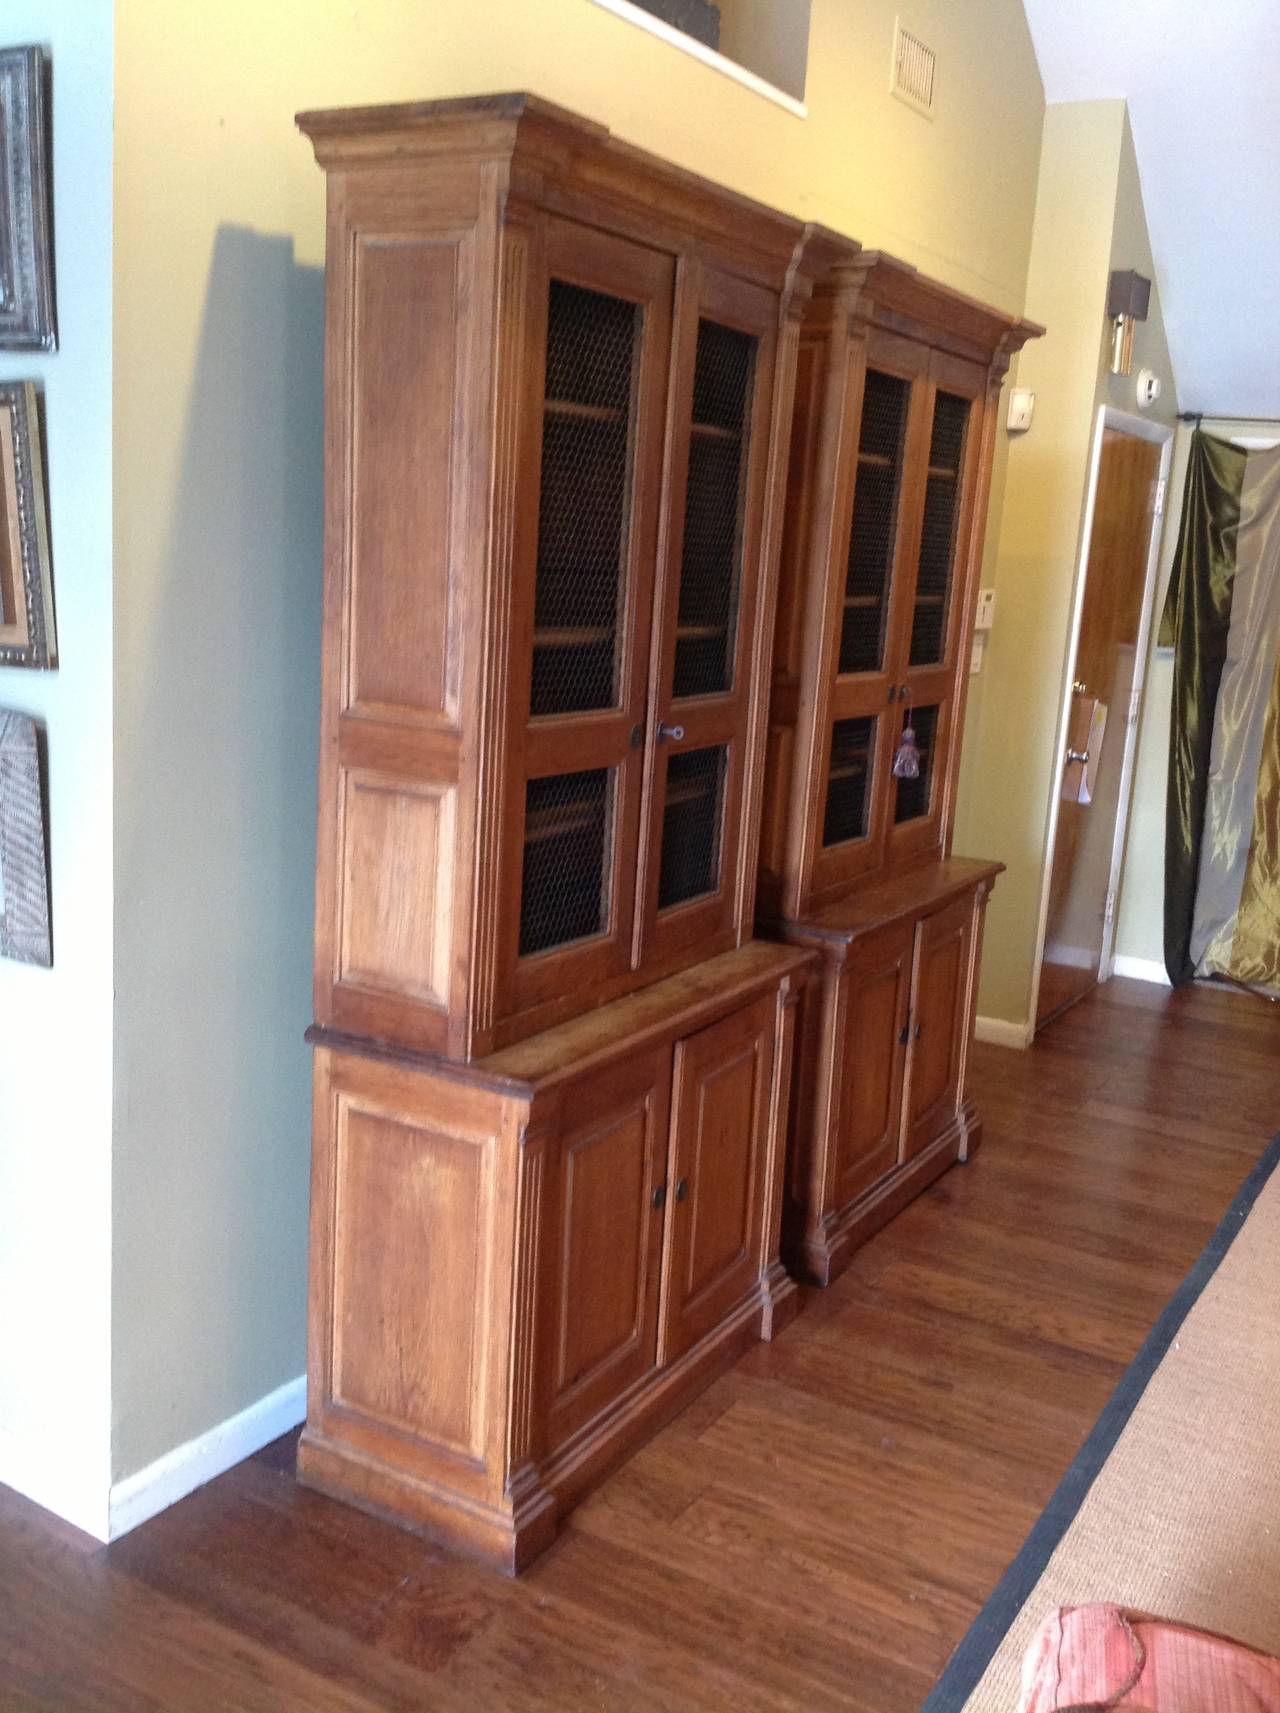 Pair of Handsome, Early 19th Century French Cabinets or Bibliotheques In Good Condition For Sale In Sleepy Hollow, NY